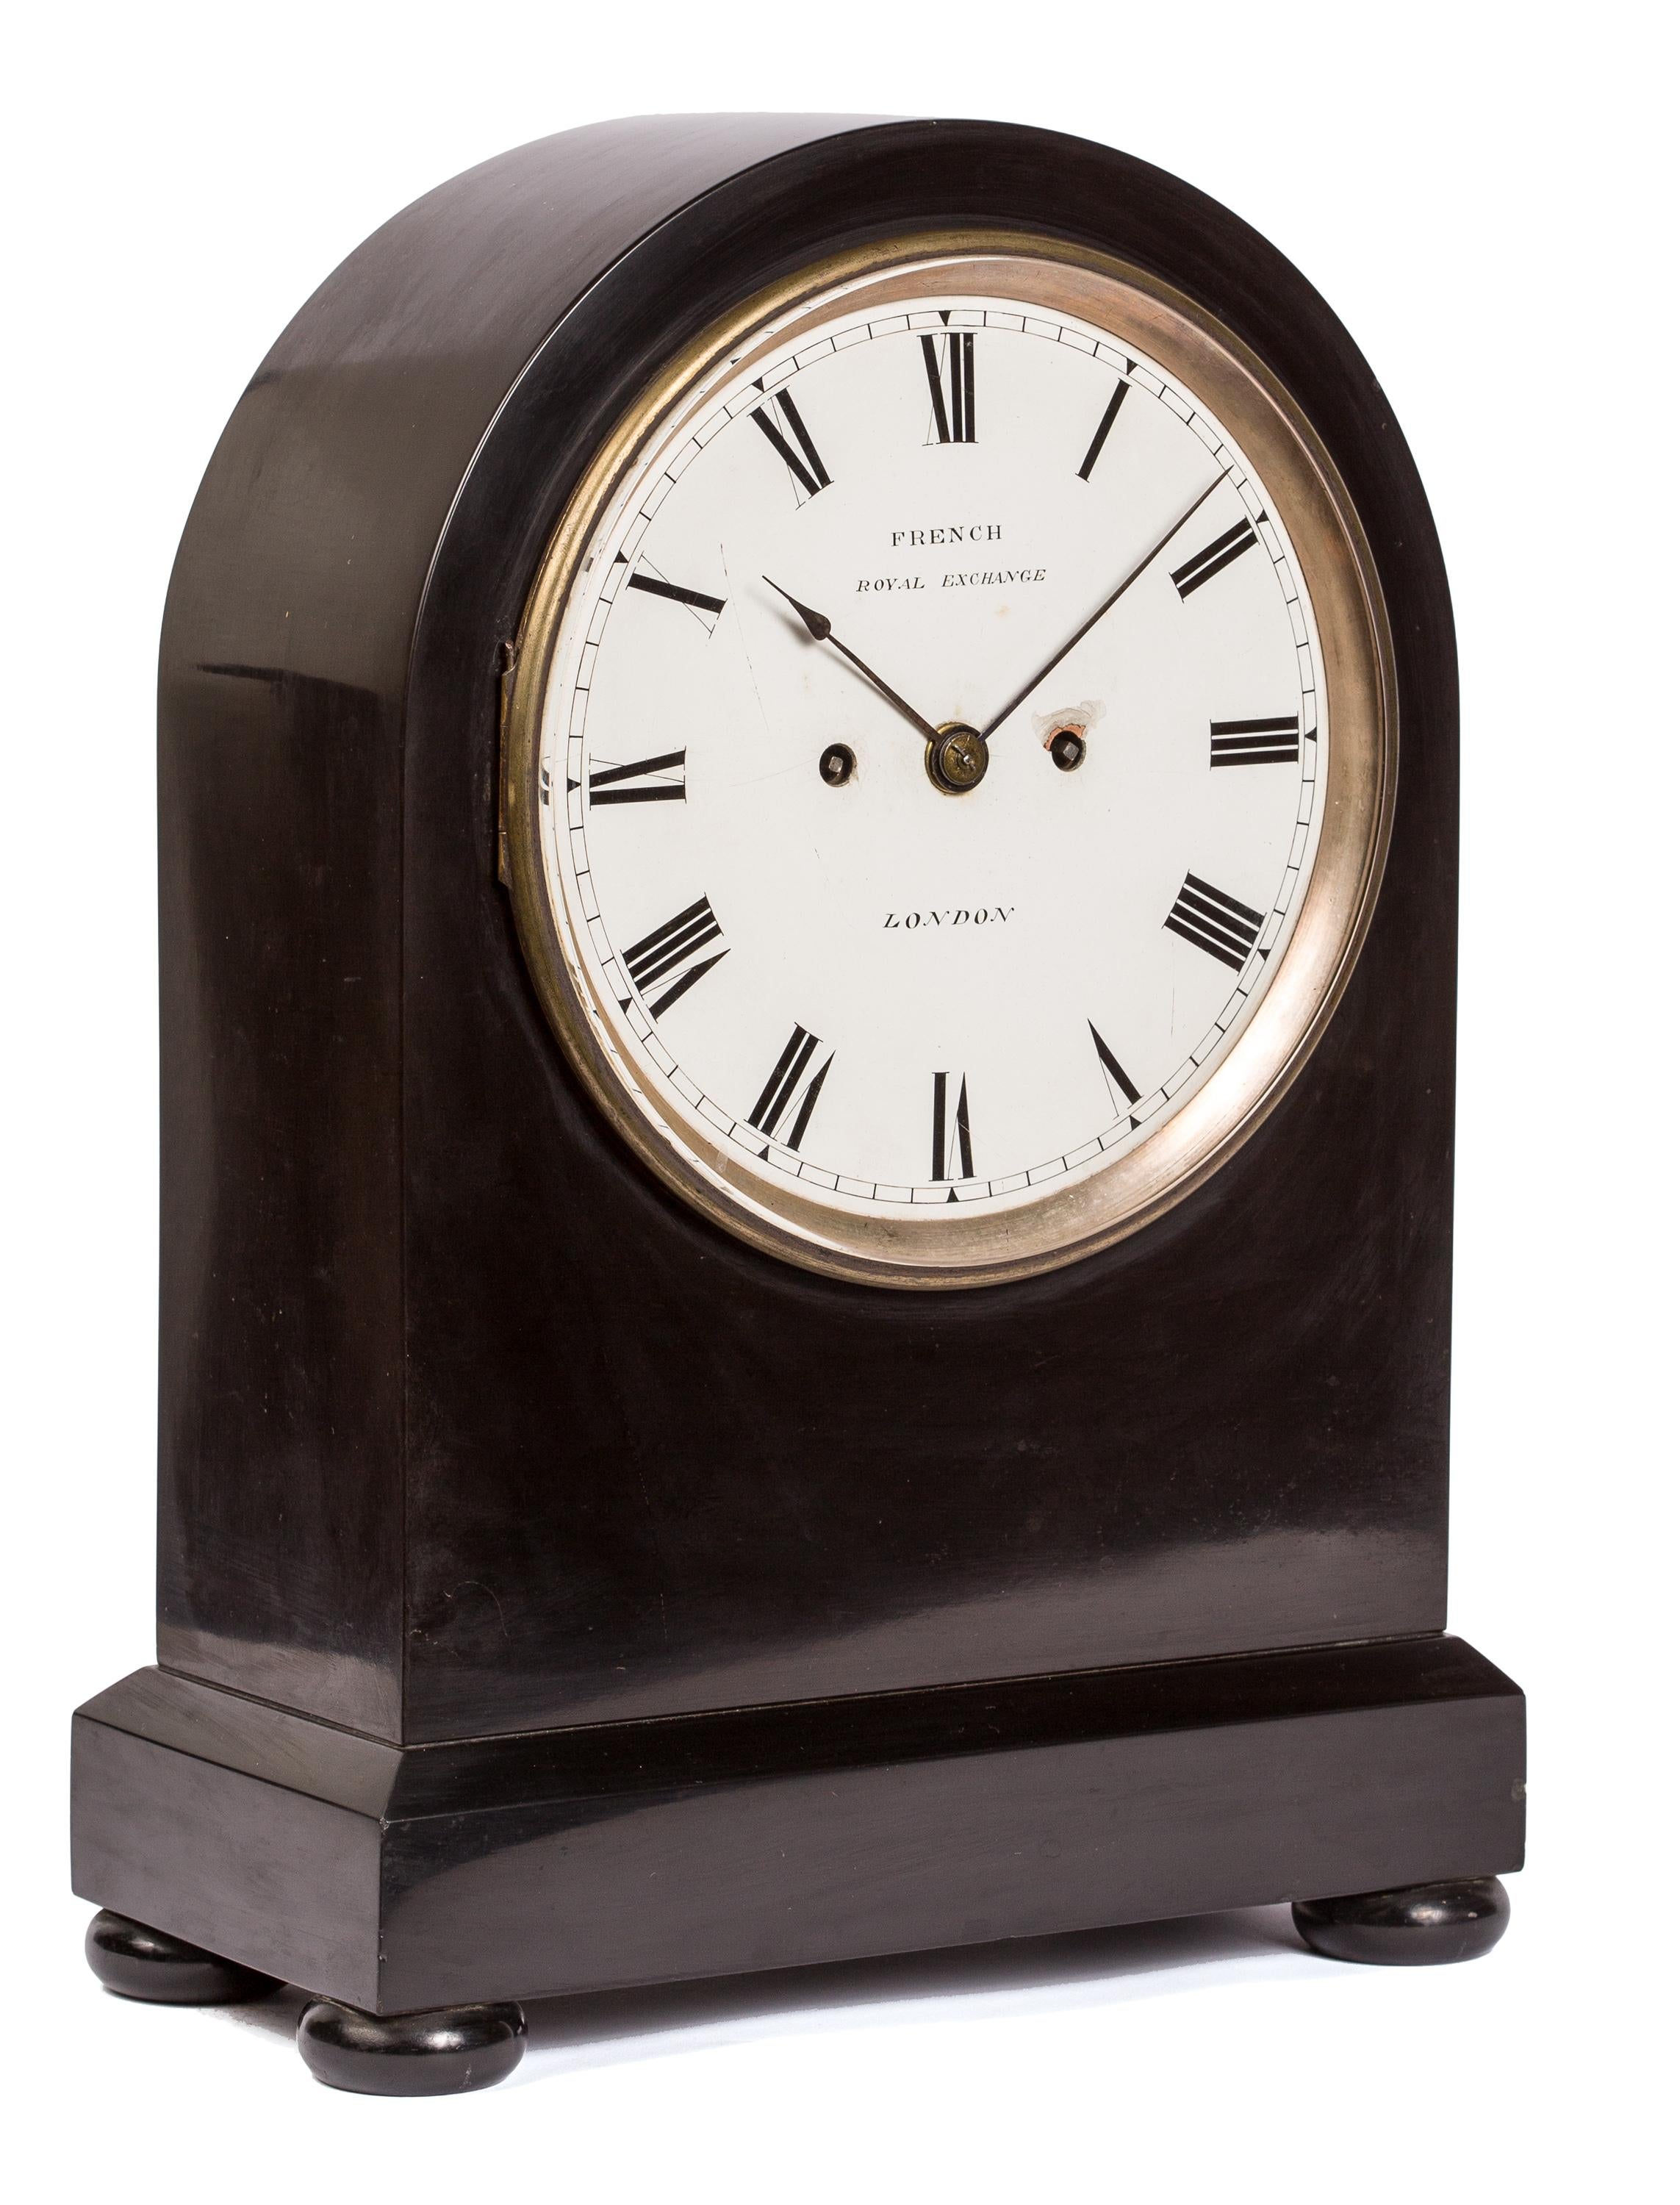 A 19th century black marble library / mantel clock with marks by Irish clockmaker James Moore French (sometimes known as 